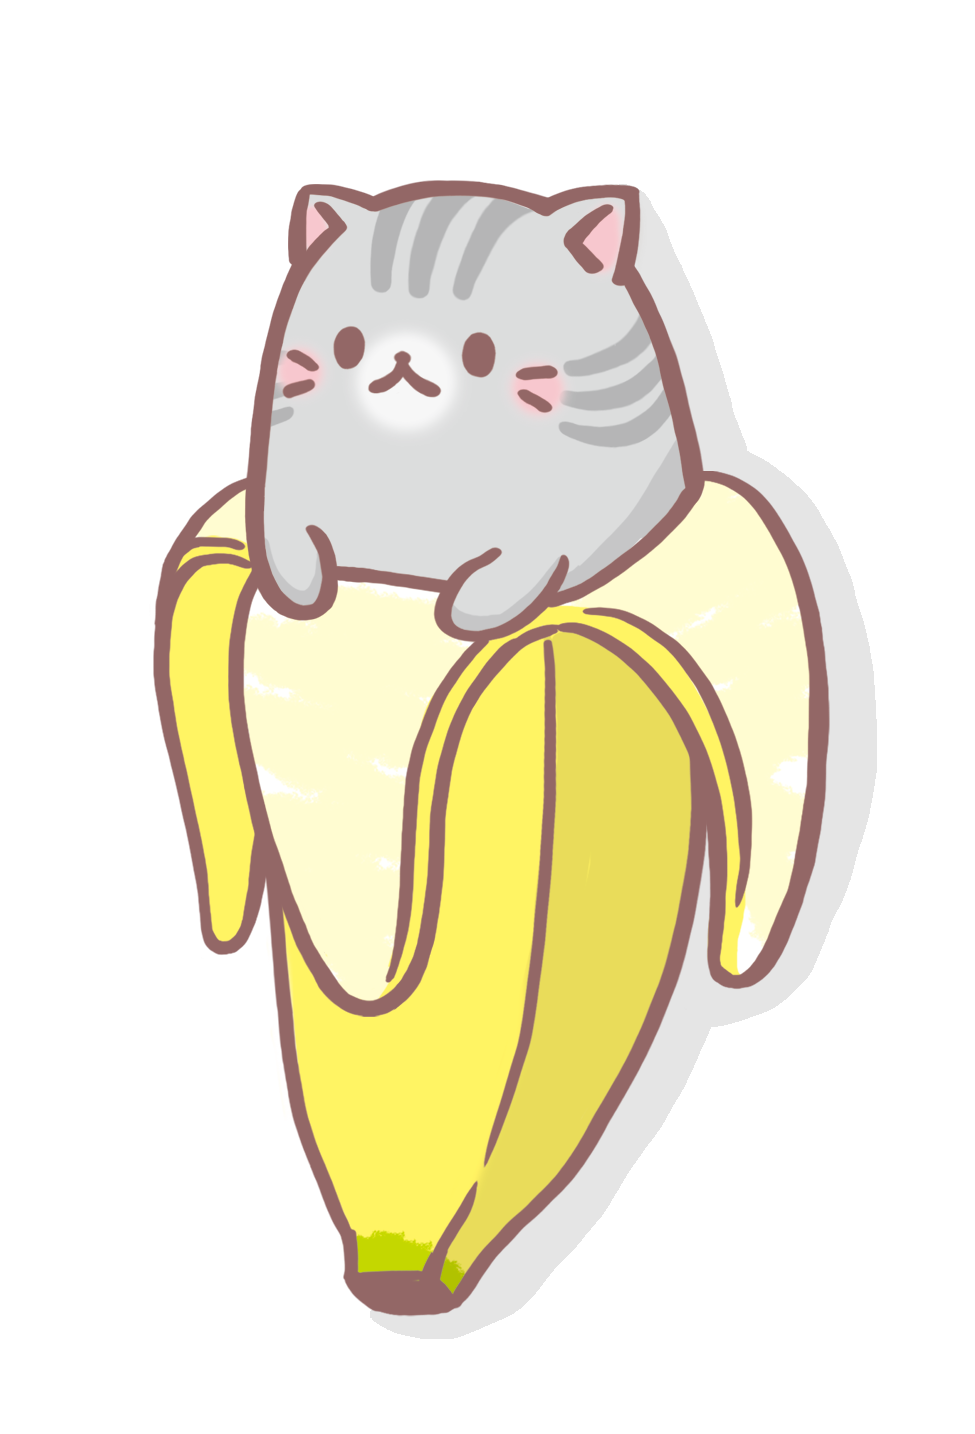 One of the Biggest Animes Out Now Features a Cat in the Banana - Nerdist